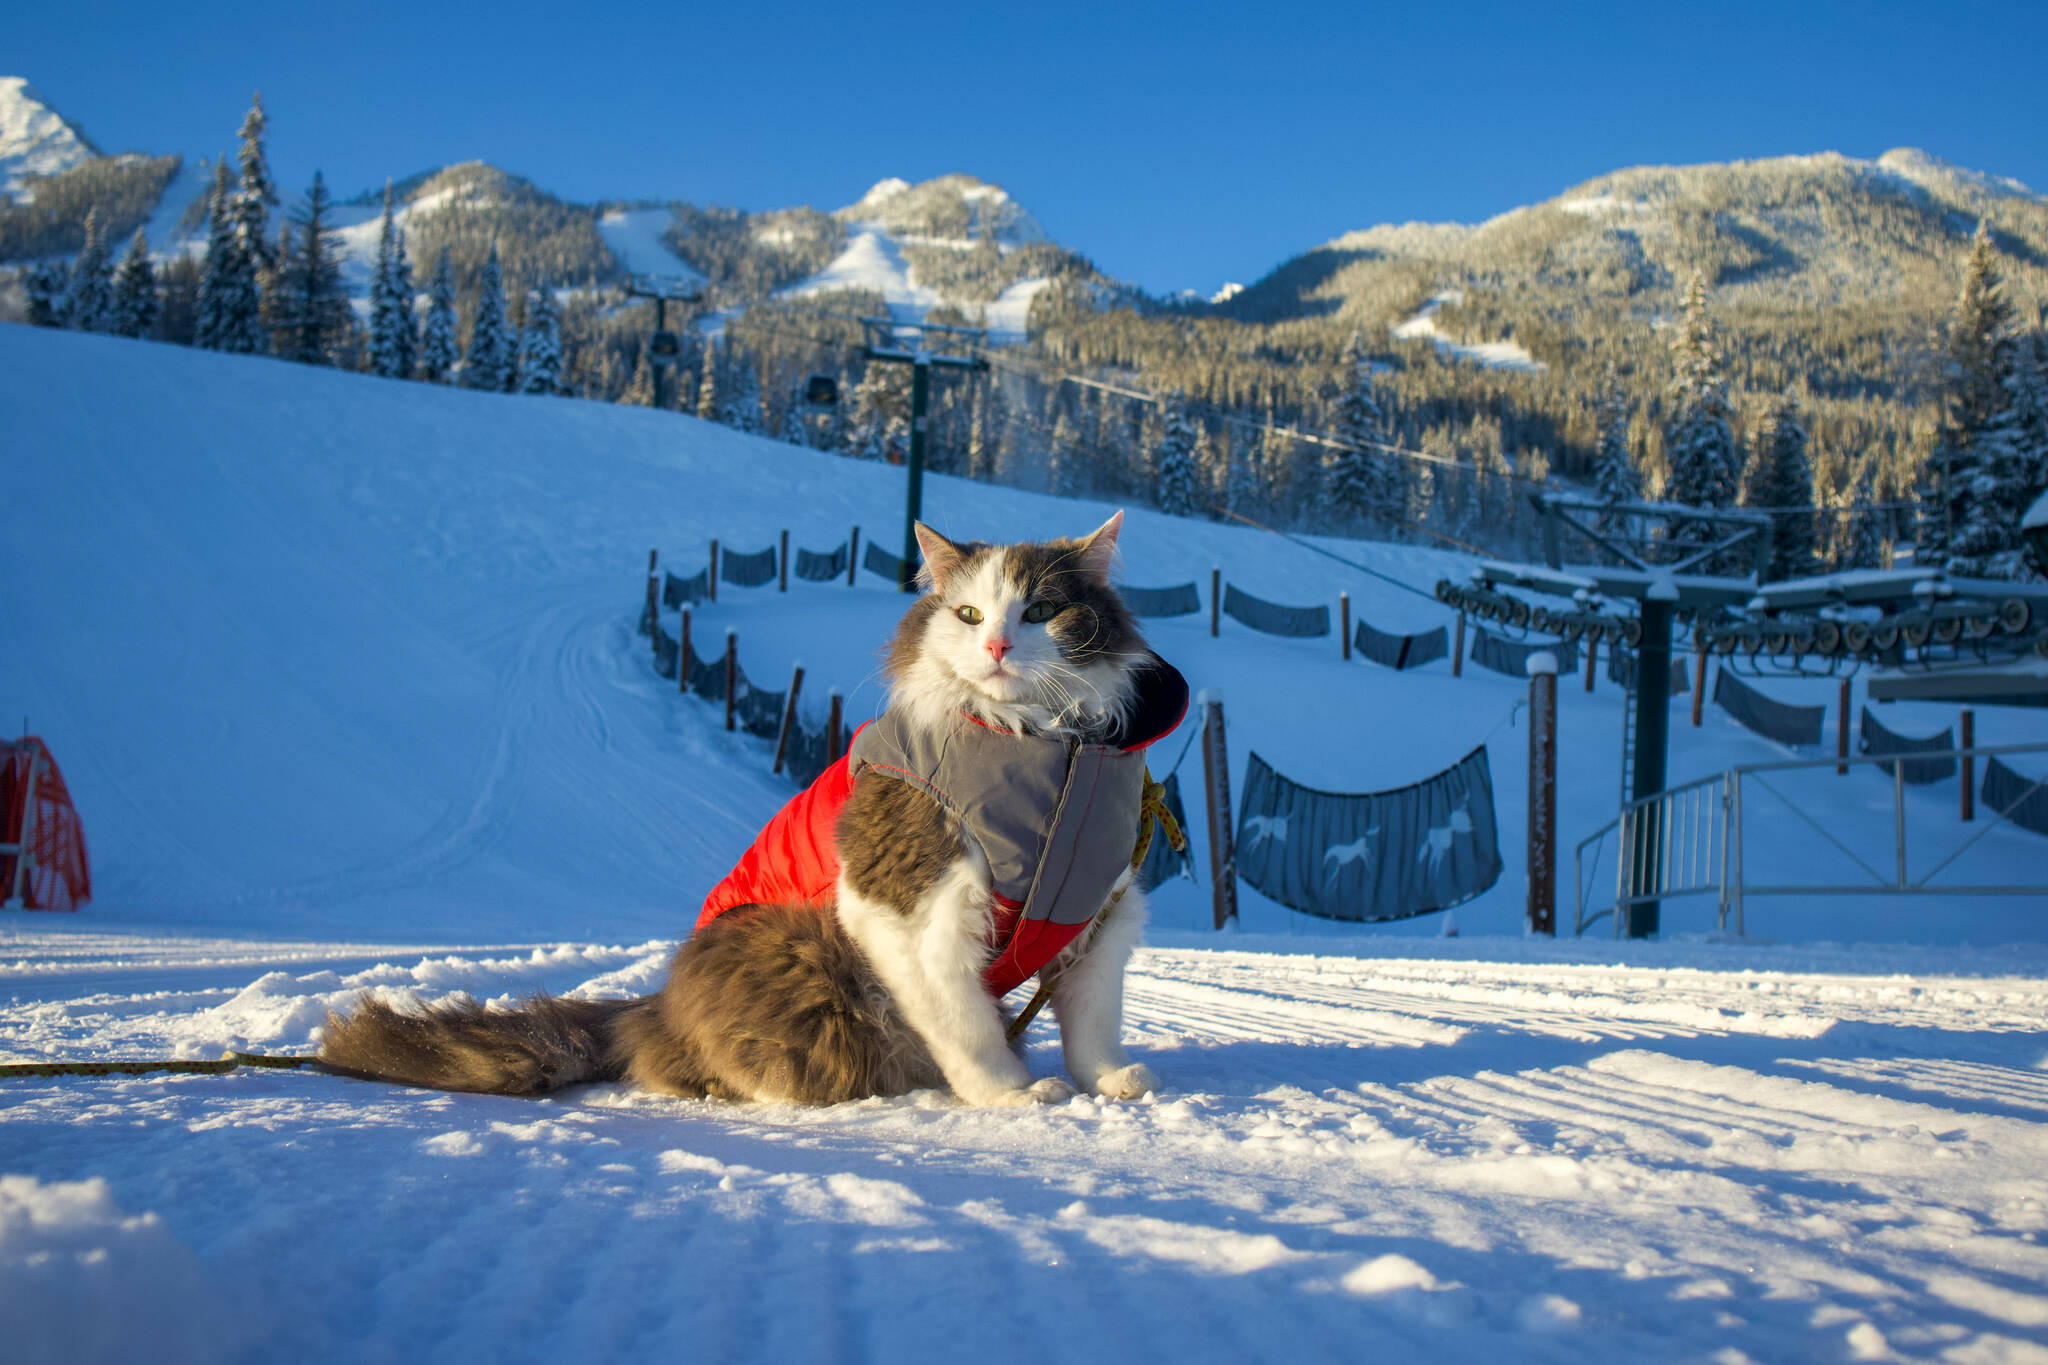 Gary the Cat is a popular instagram celebrity, with the famous adventure cat paying a visit to Kicking Horse Mountain Resort and other RCR resorts this past week to mark the start of ski season. (JAmes Eastham photo)